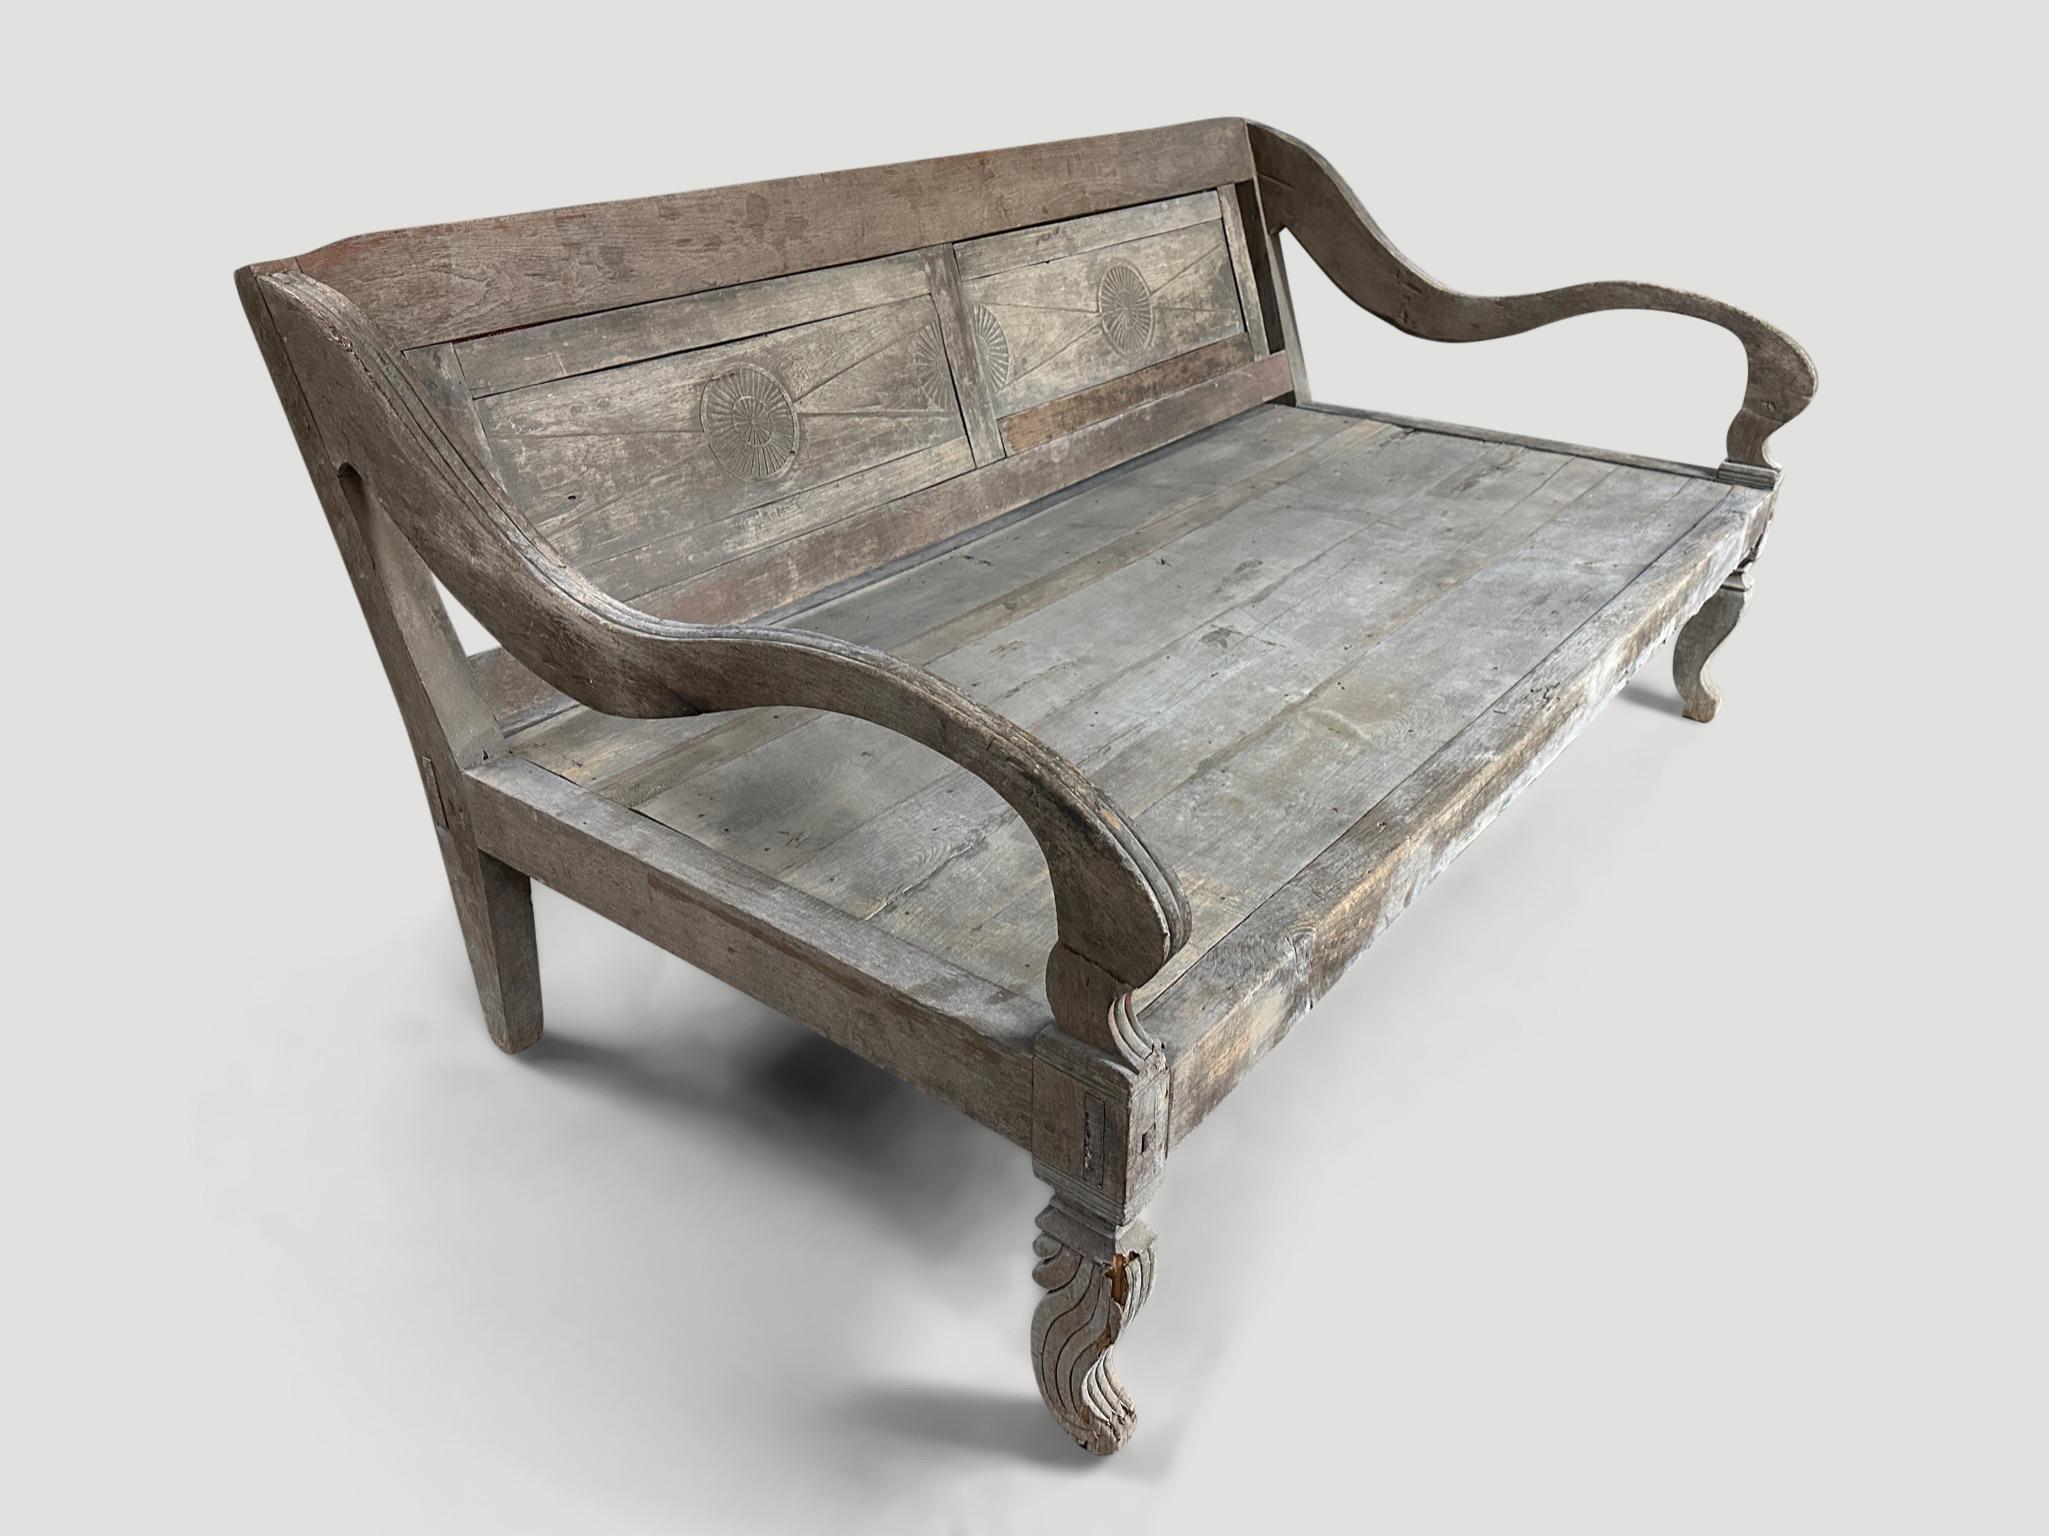 Rare antique teak day bed from the island of Madura. The patina on the wood is stunning. Circa 1900. The length of the arm is 46” and hand carved from one piece of wood. Taken from my finest collection and impossible to source now. The detail on the